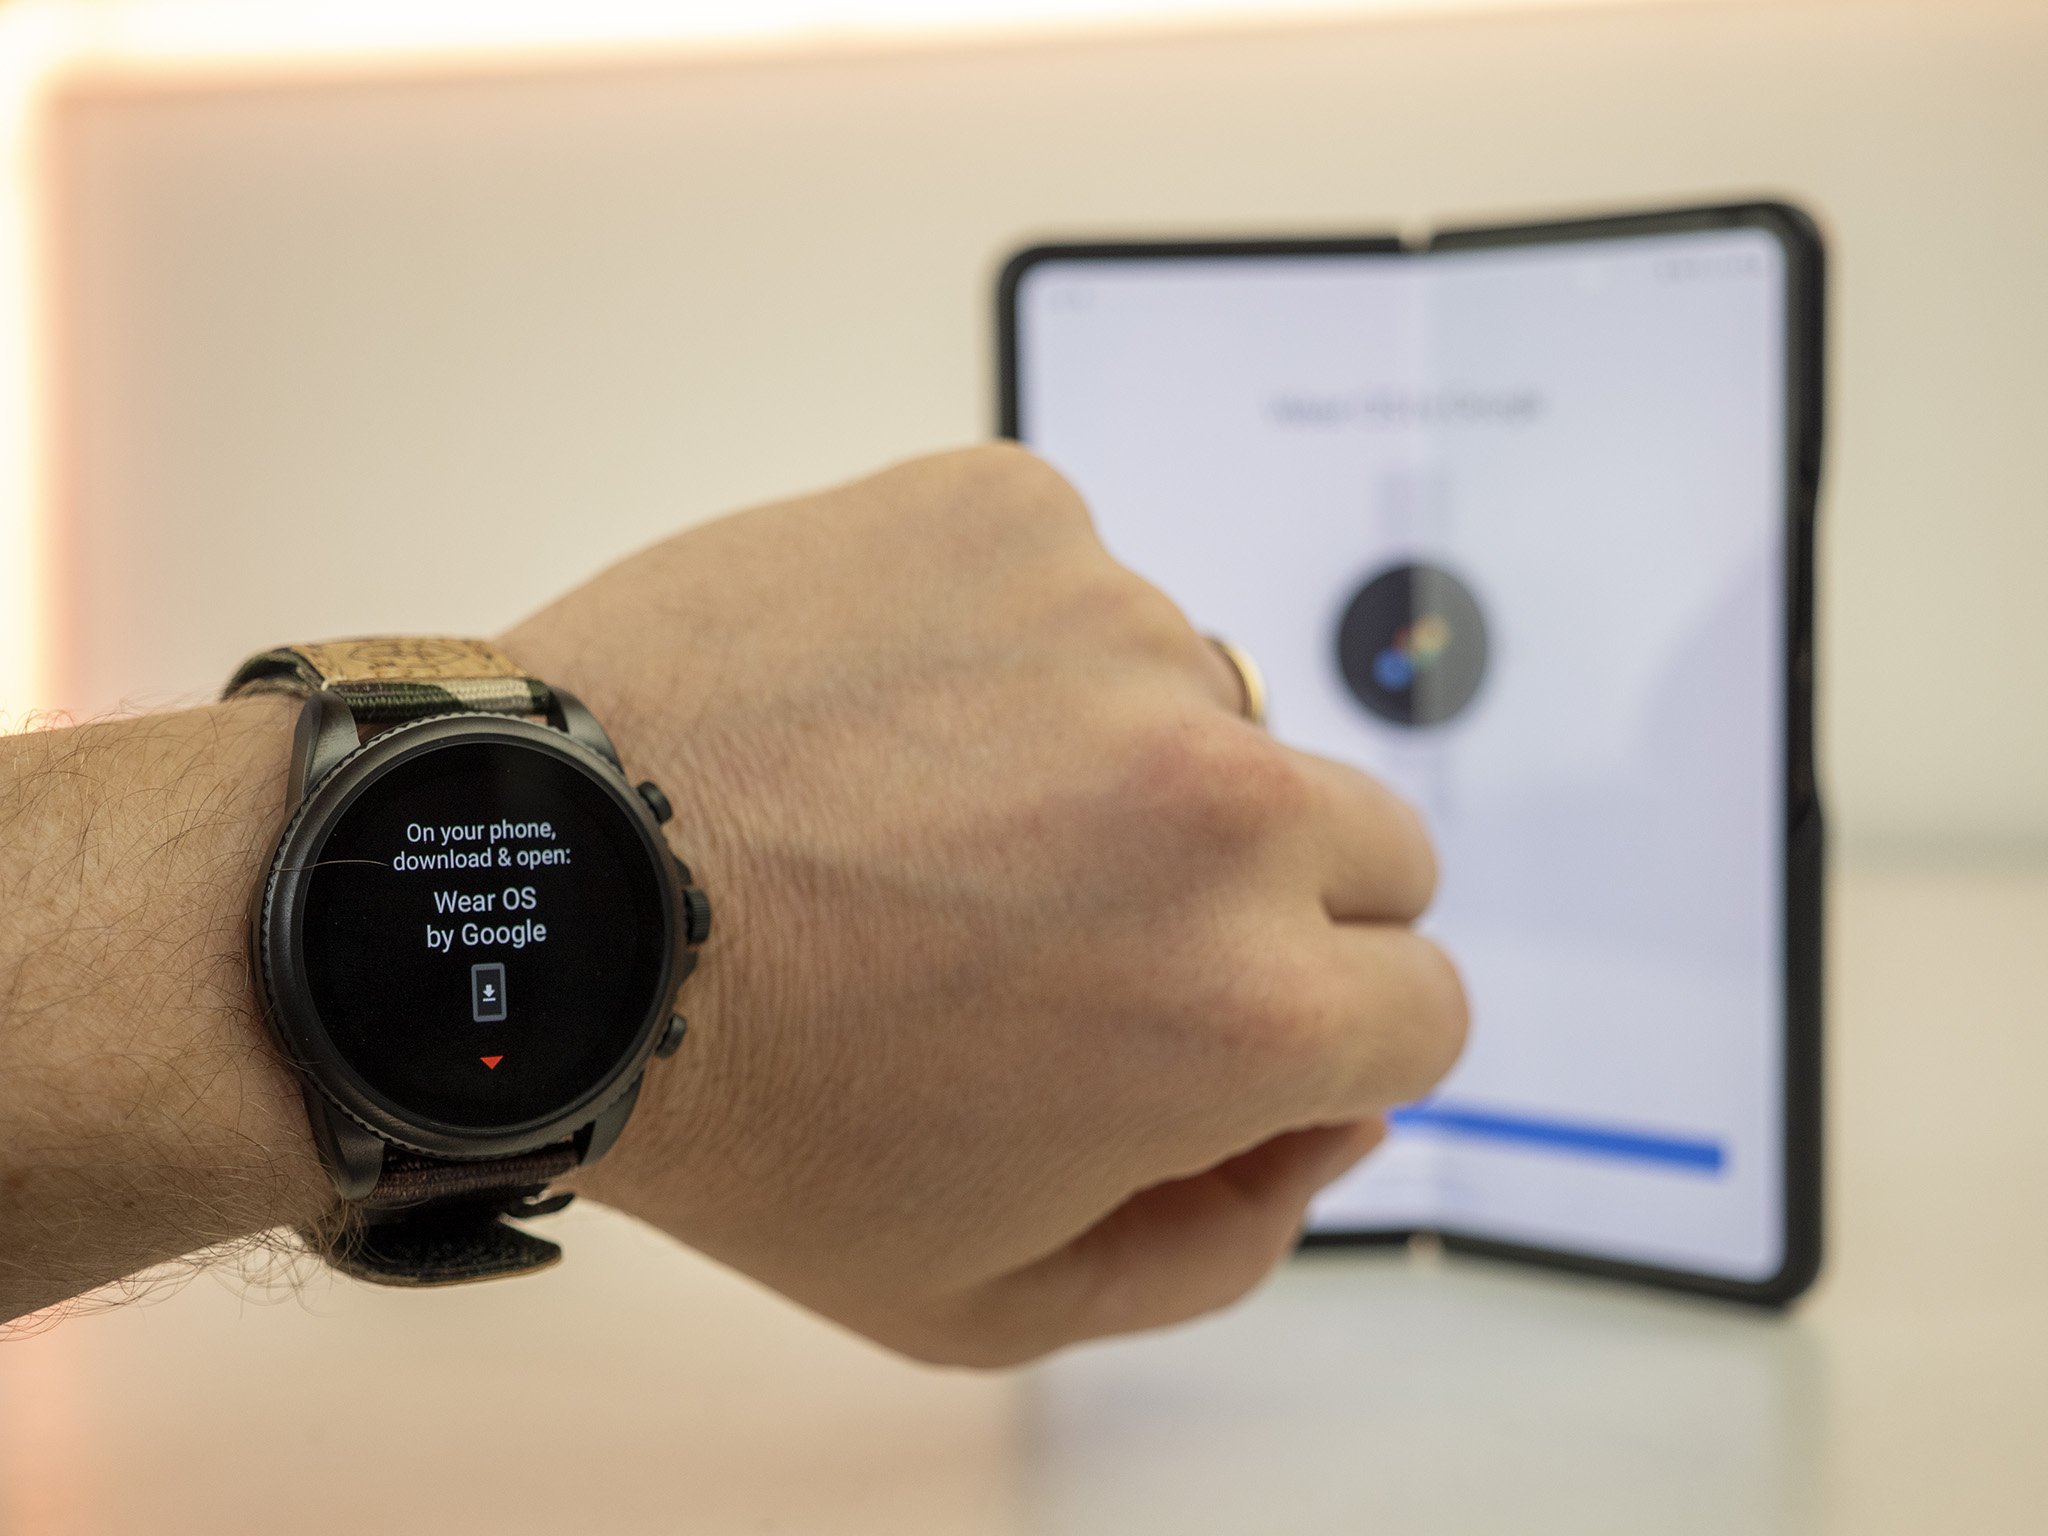 Wear OS companion app opens up beta program, could be a sign of things to come